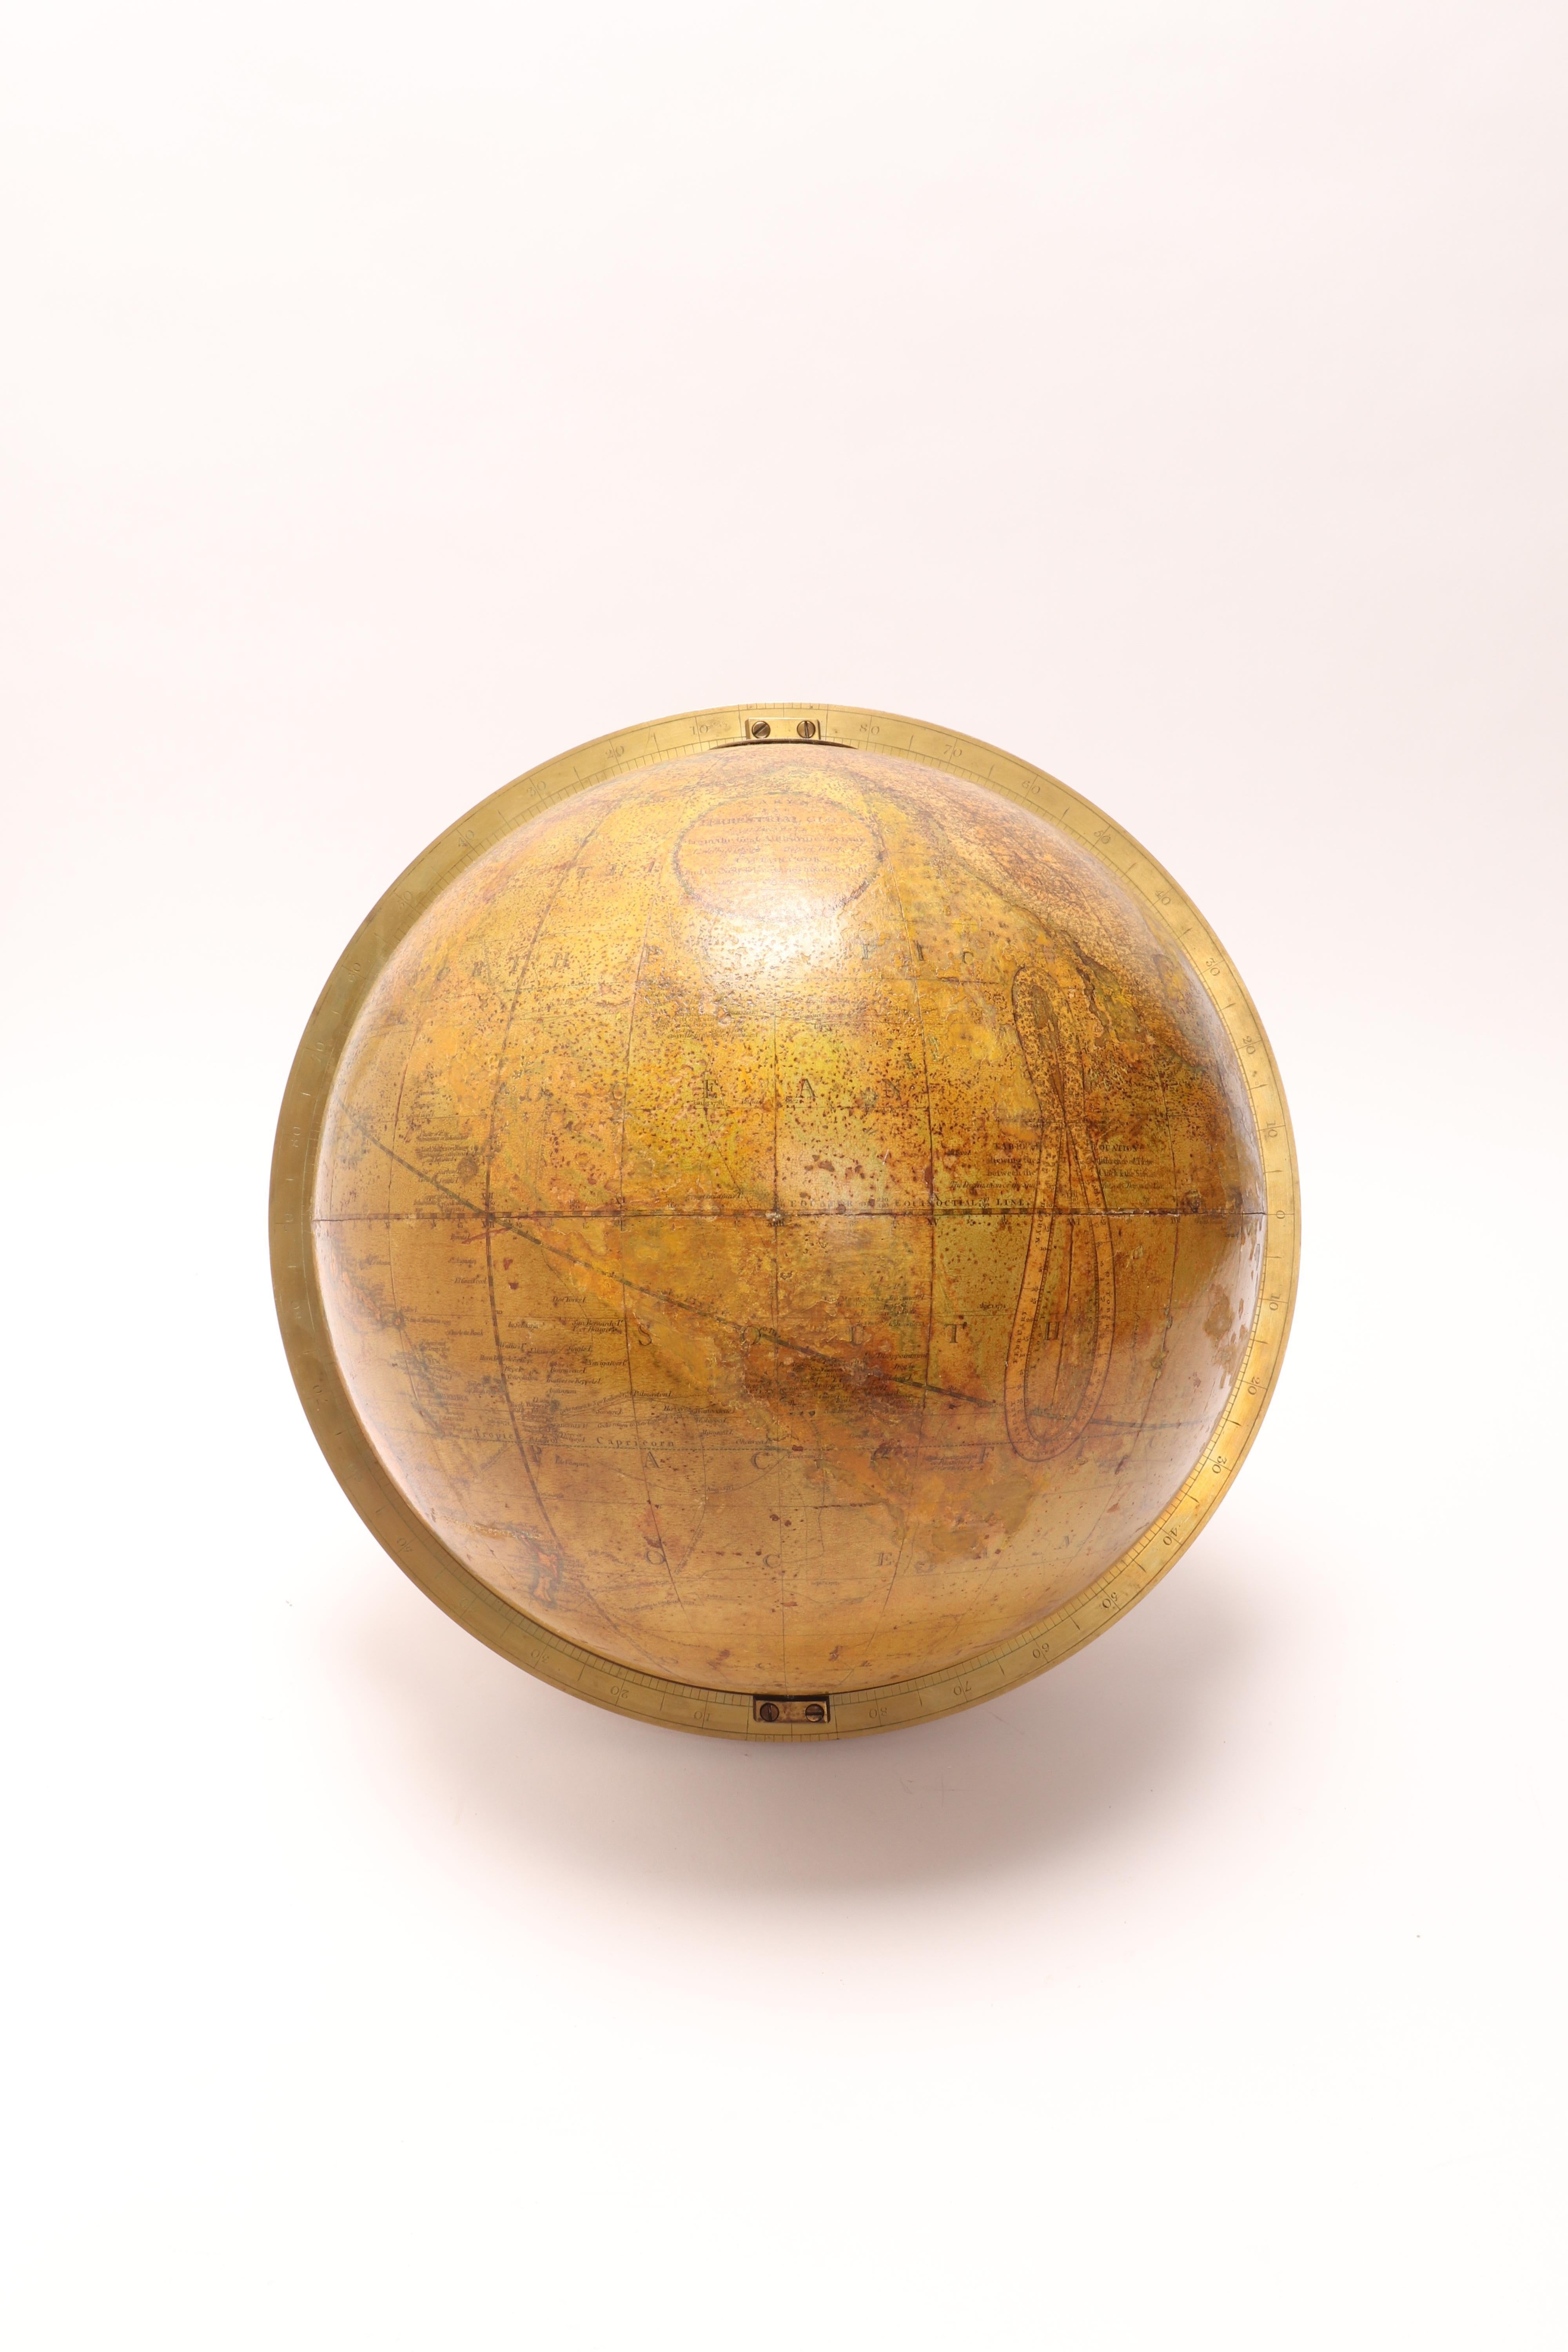 Terrestrial Globe Signed Cary, London, 1800 2